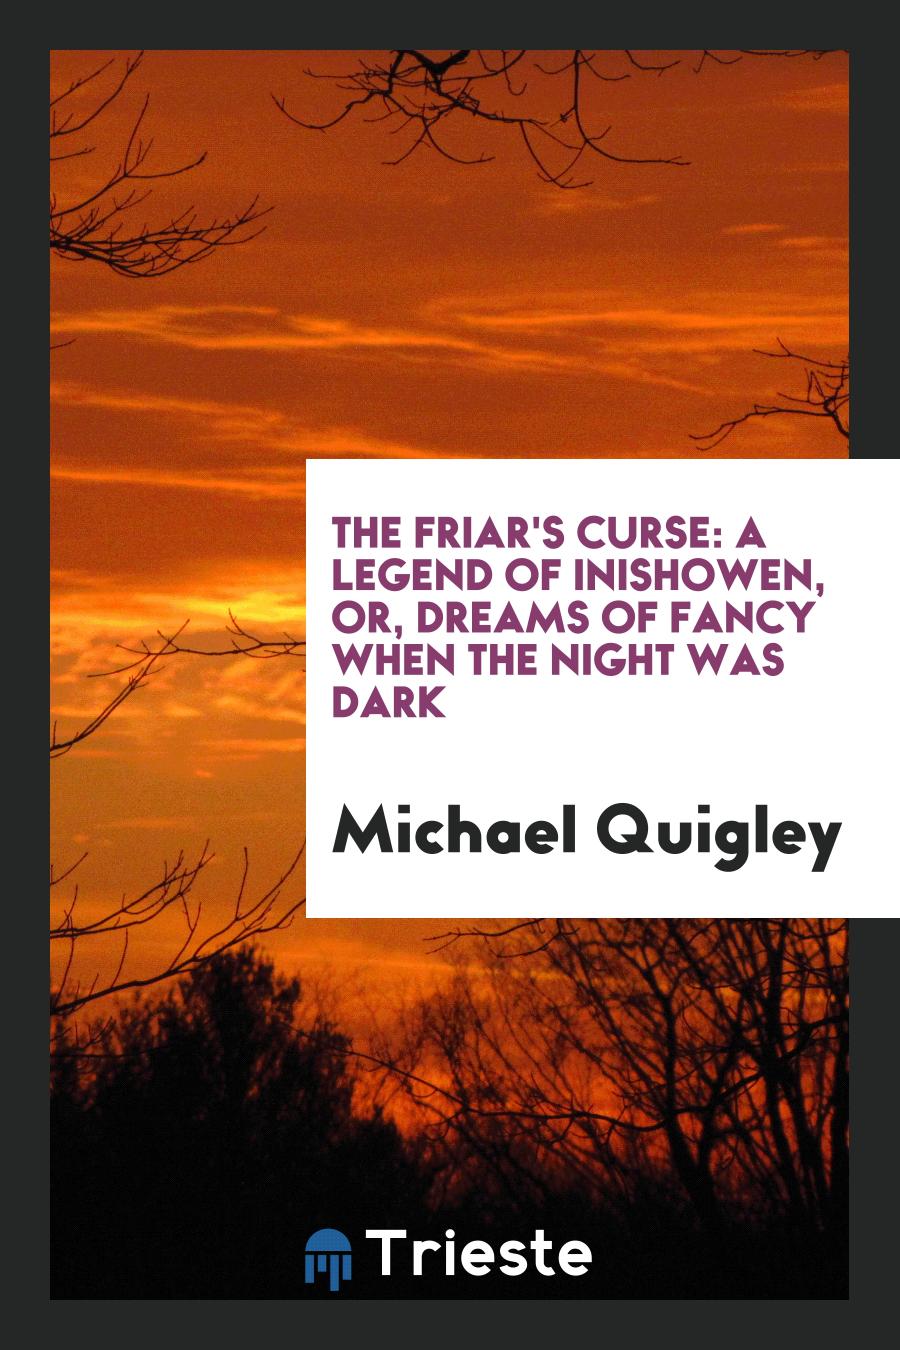 The Friar's Curse: A Legend of Inishowen, Or, Dreams of Fancy when the Night was Dark